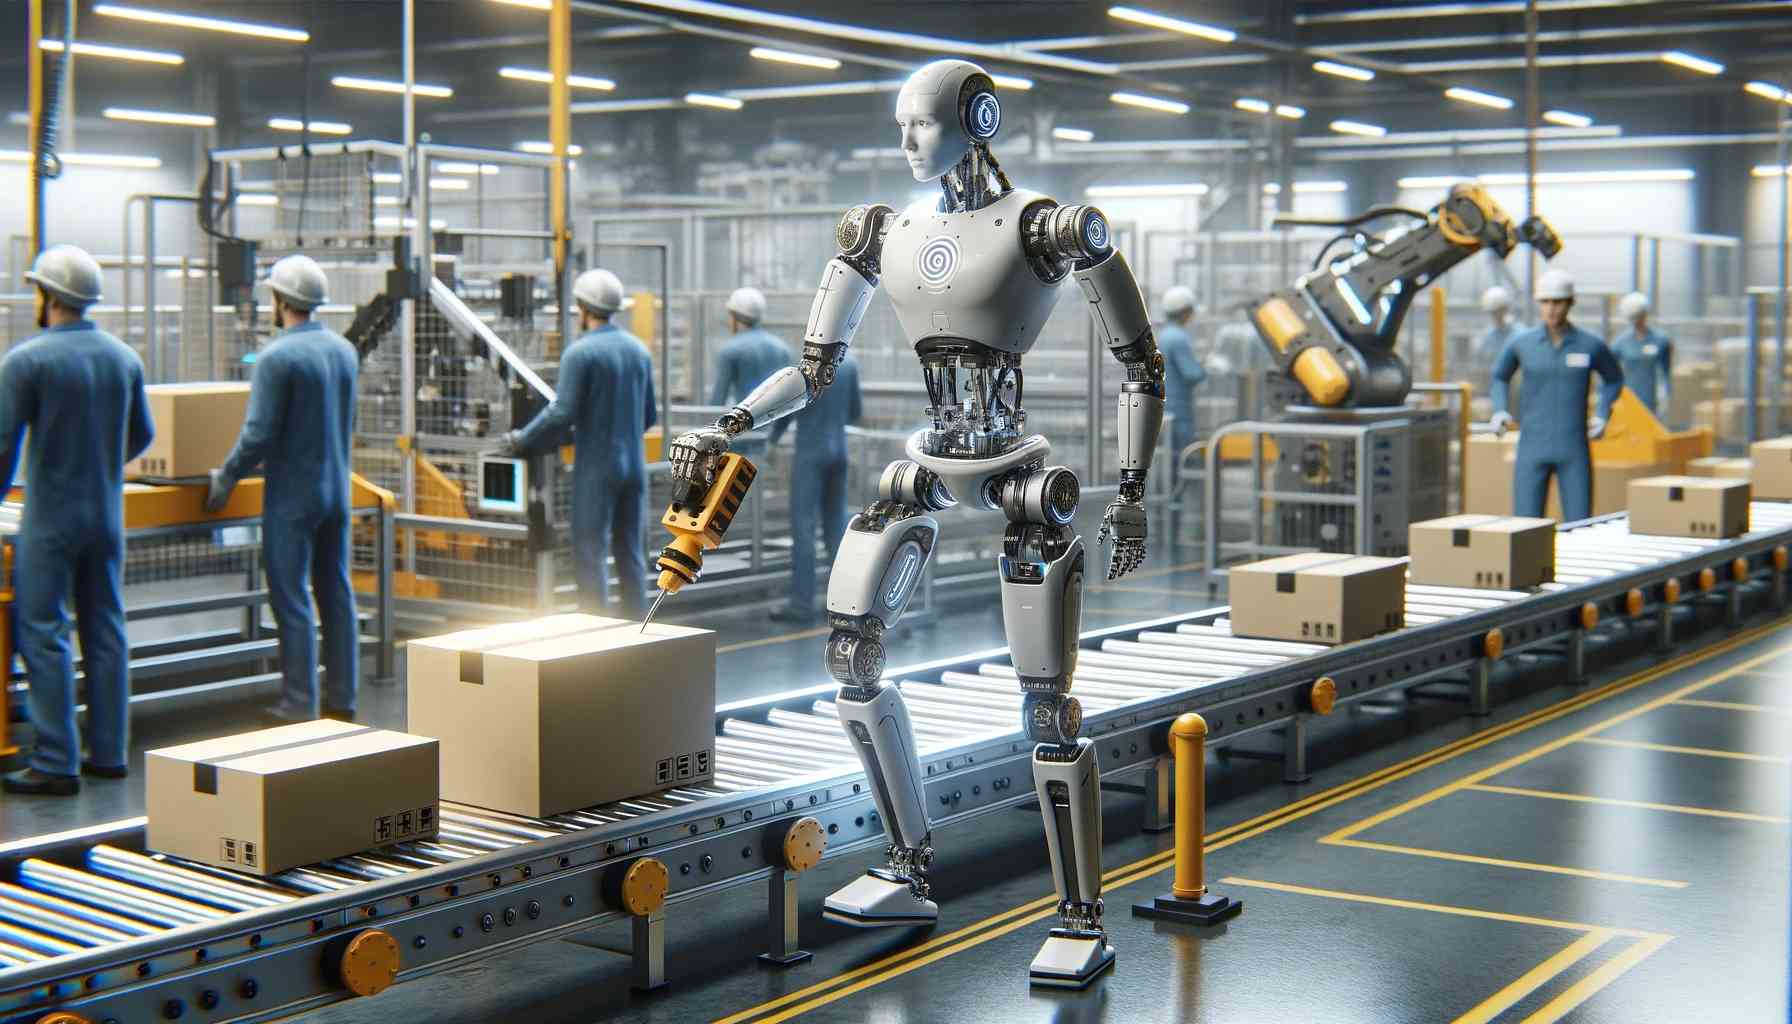 The World’s Biggest Employer Amazon Has Replaced Over 100,000 Workers With Robots